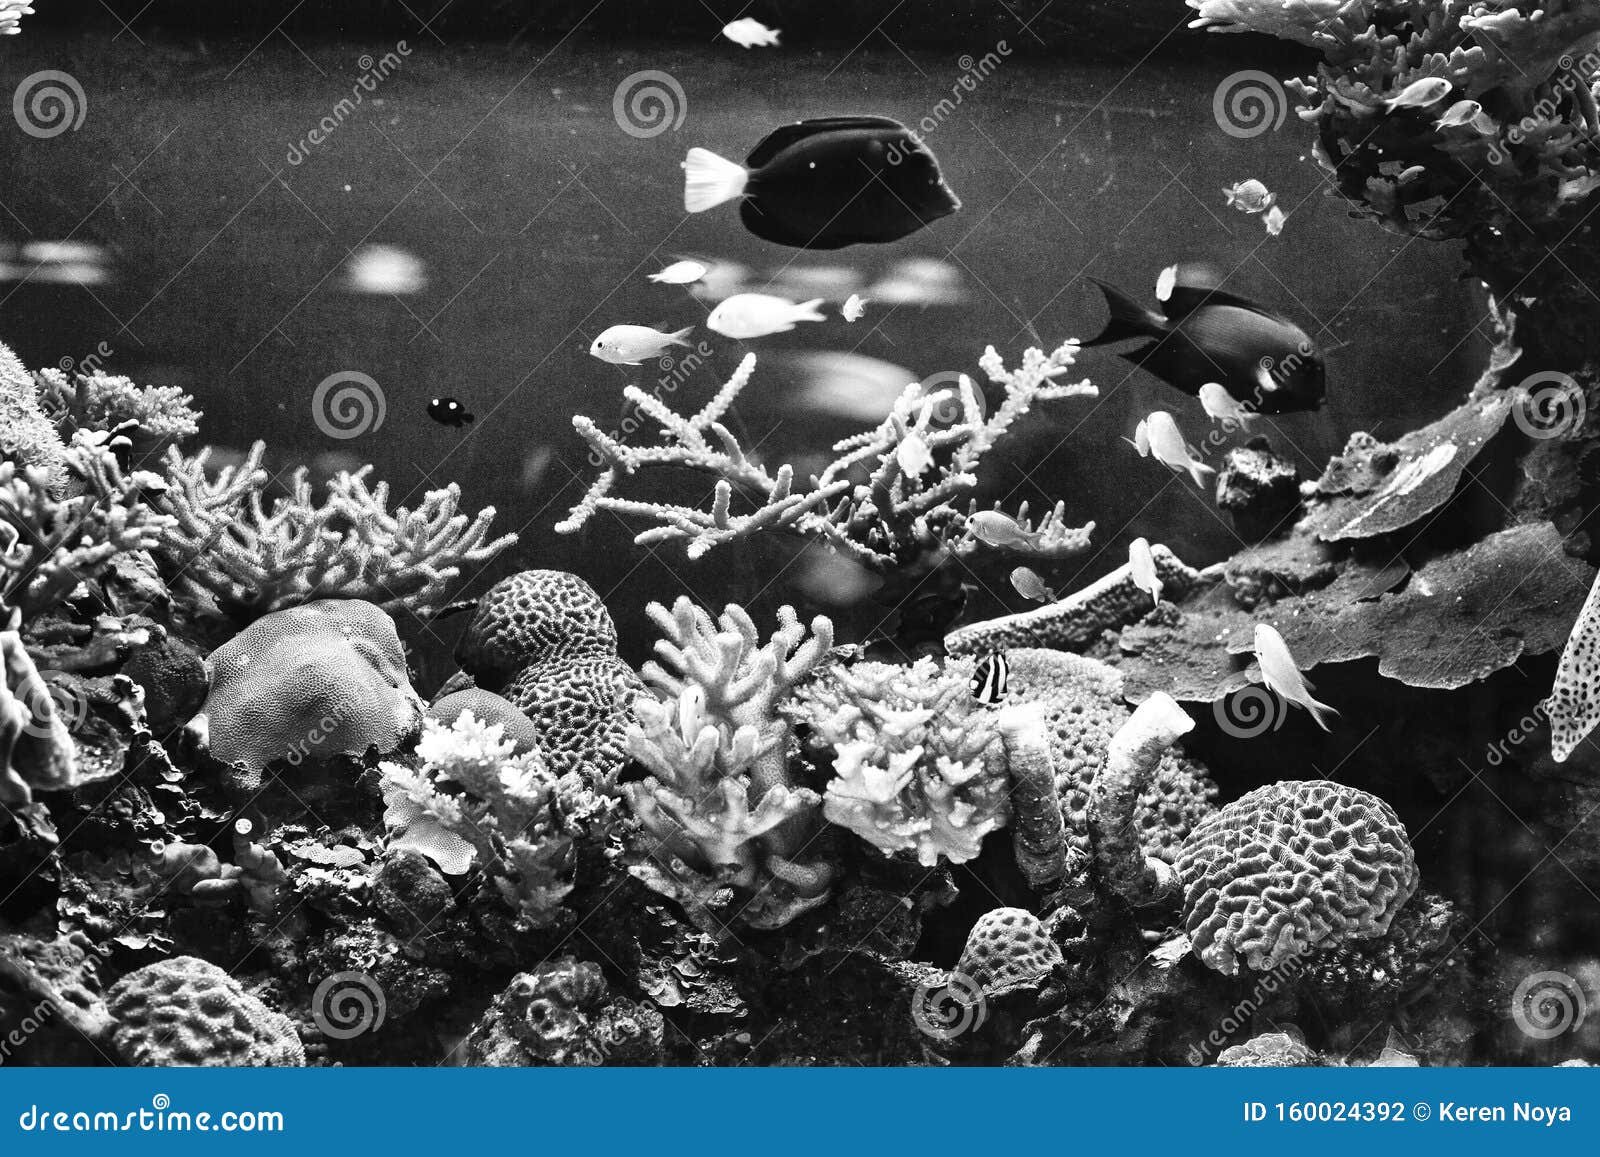 A Retro Image of Underwater Life Expressed by Tiny Fish, Corals and Sea  Plants Stock Photo - Image of tiny, flora: 160024392